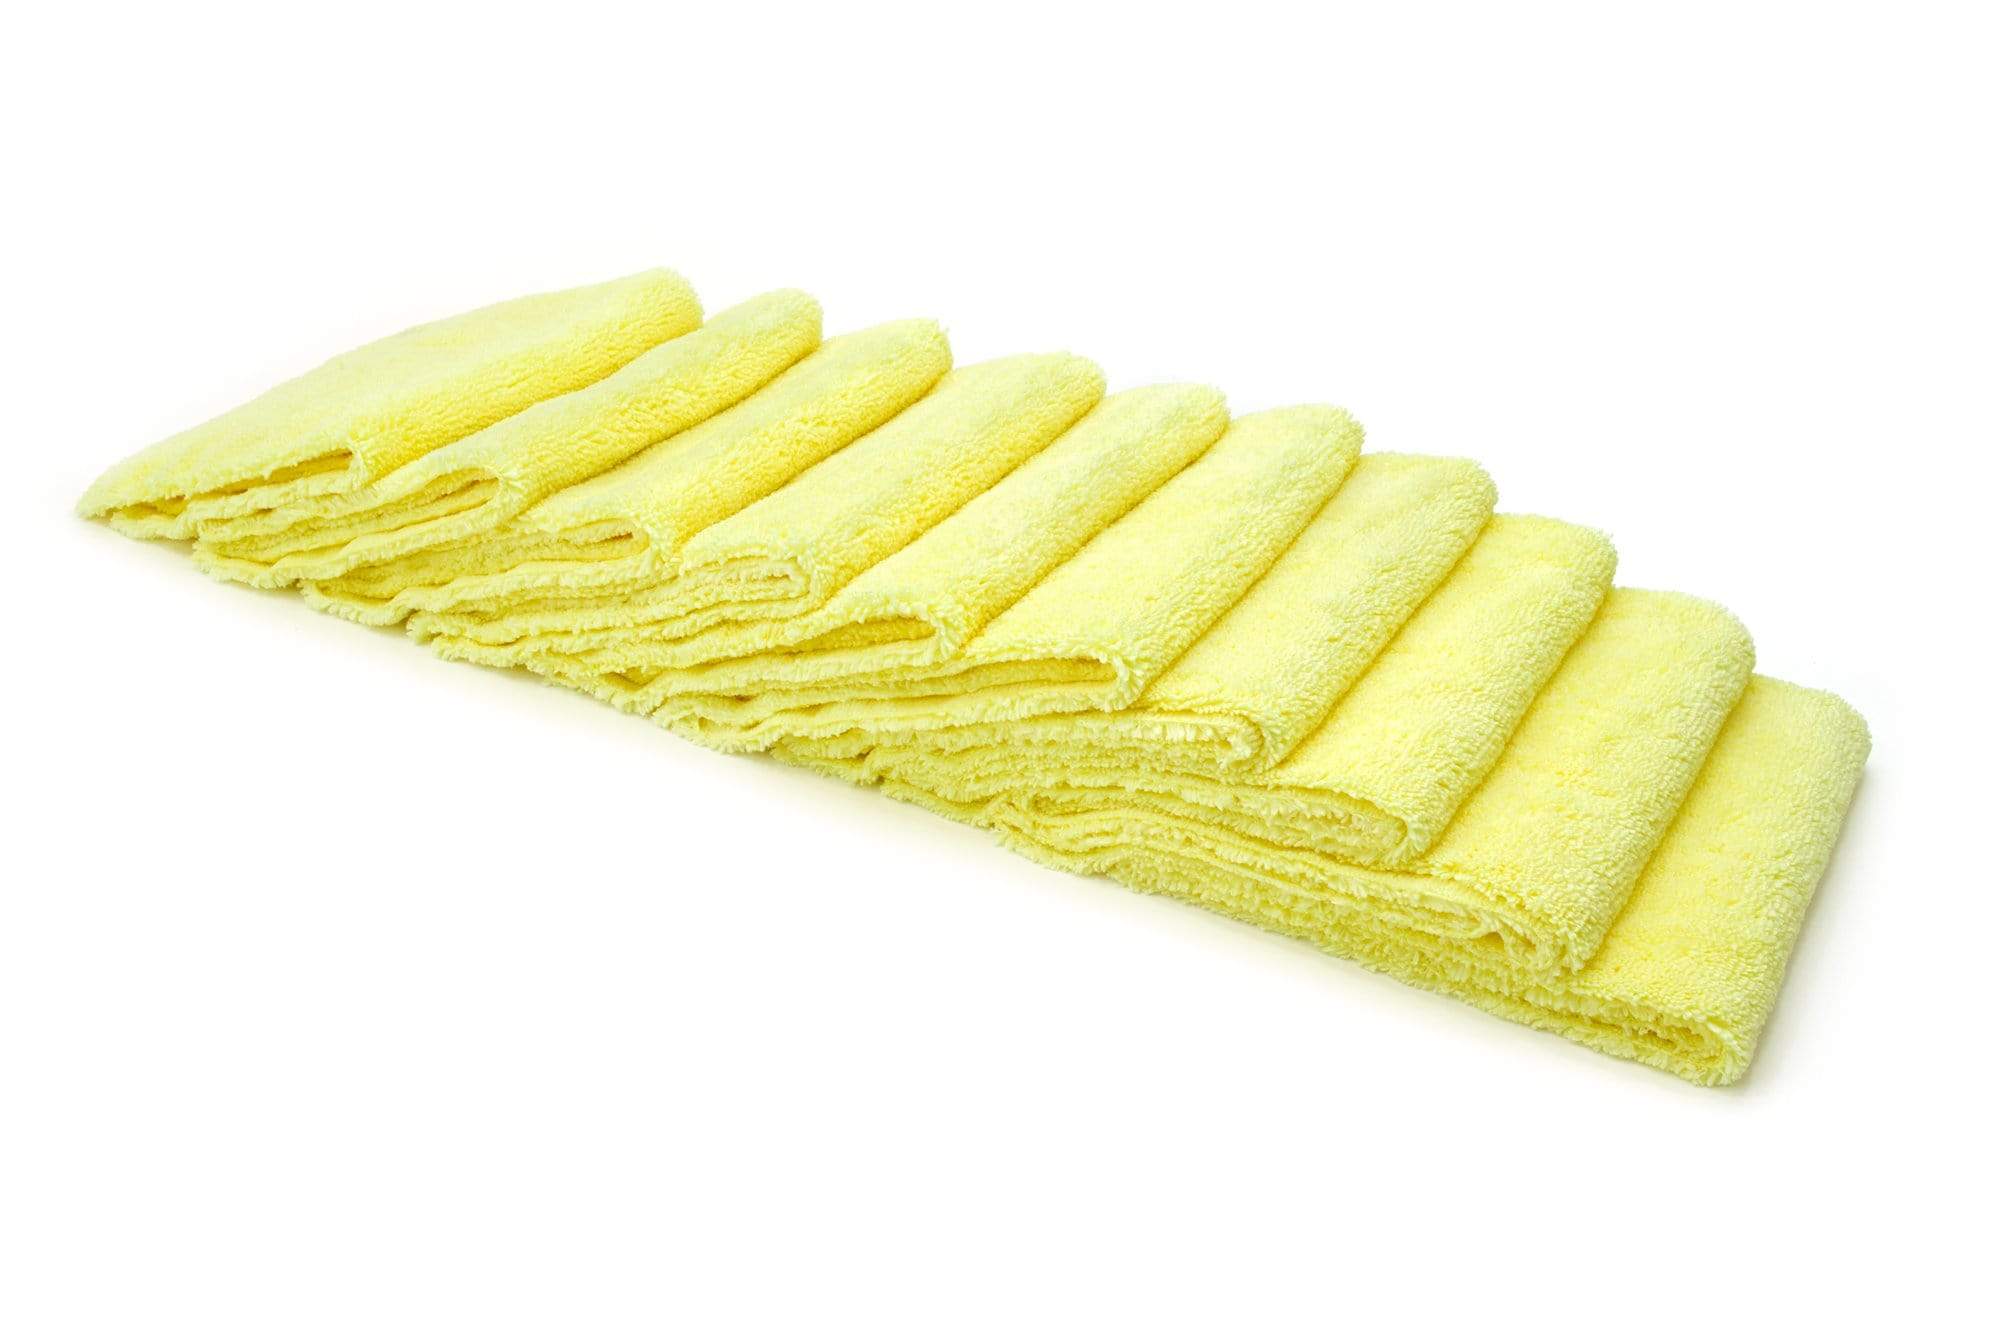 Autofiber Towel Yellow [Cost What!] Edgeless Microfiber Shop Rag (16 in. x 16 in.) - 10 pack